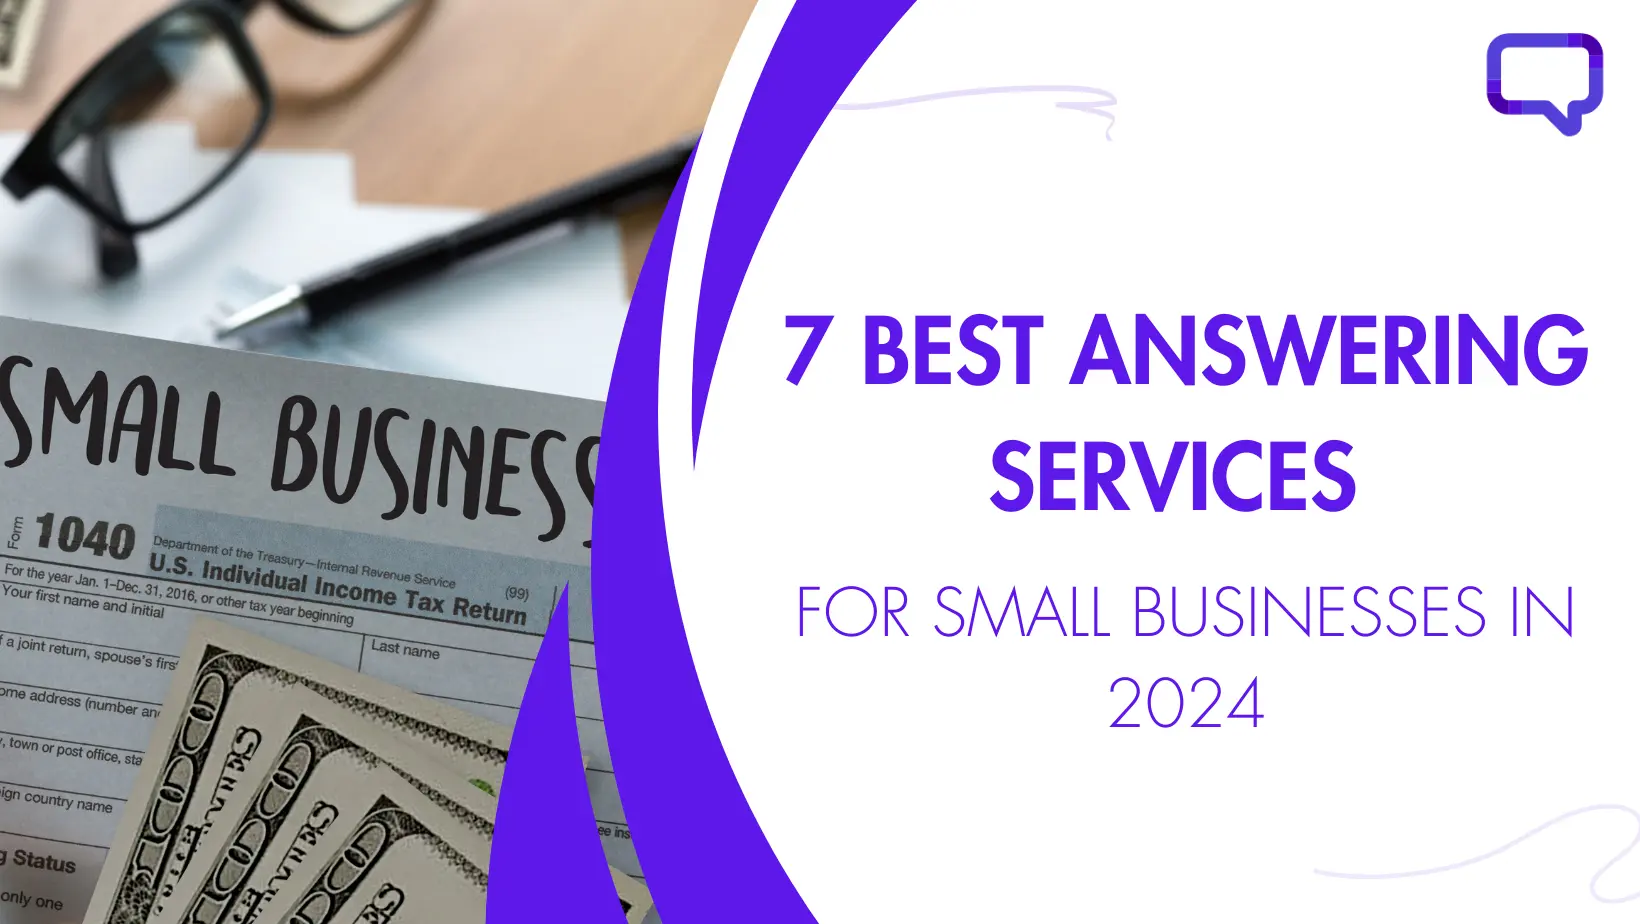 Answering Services for Small Businesses